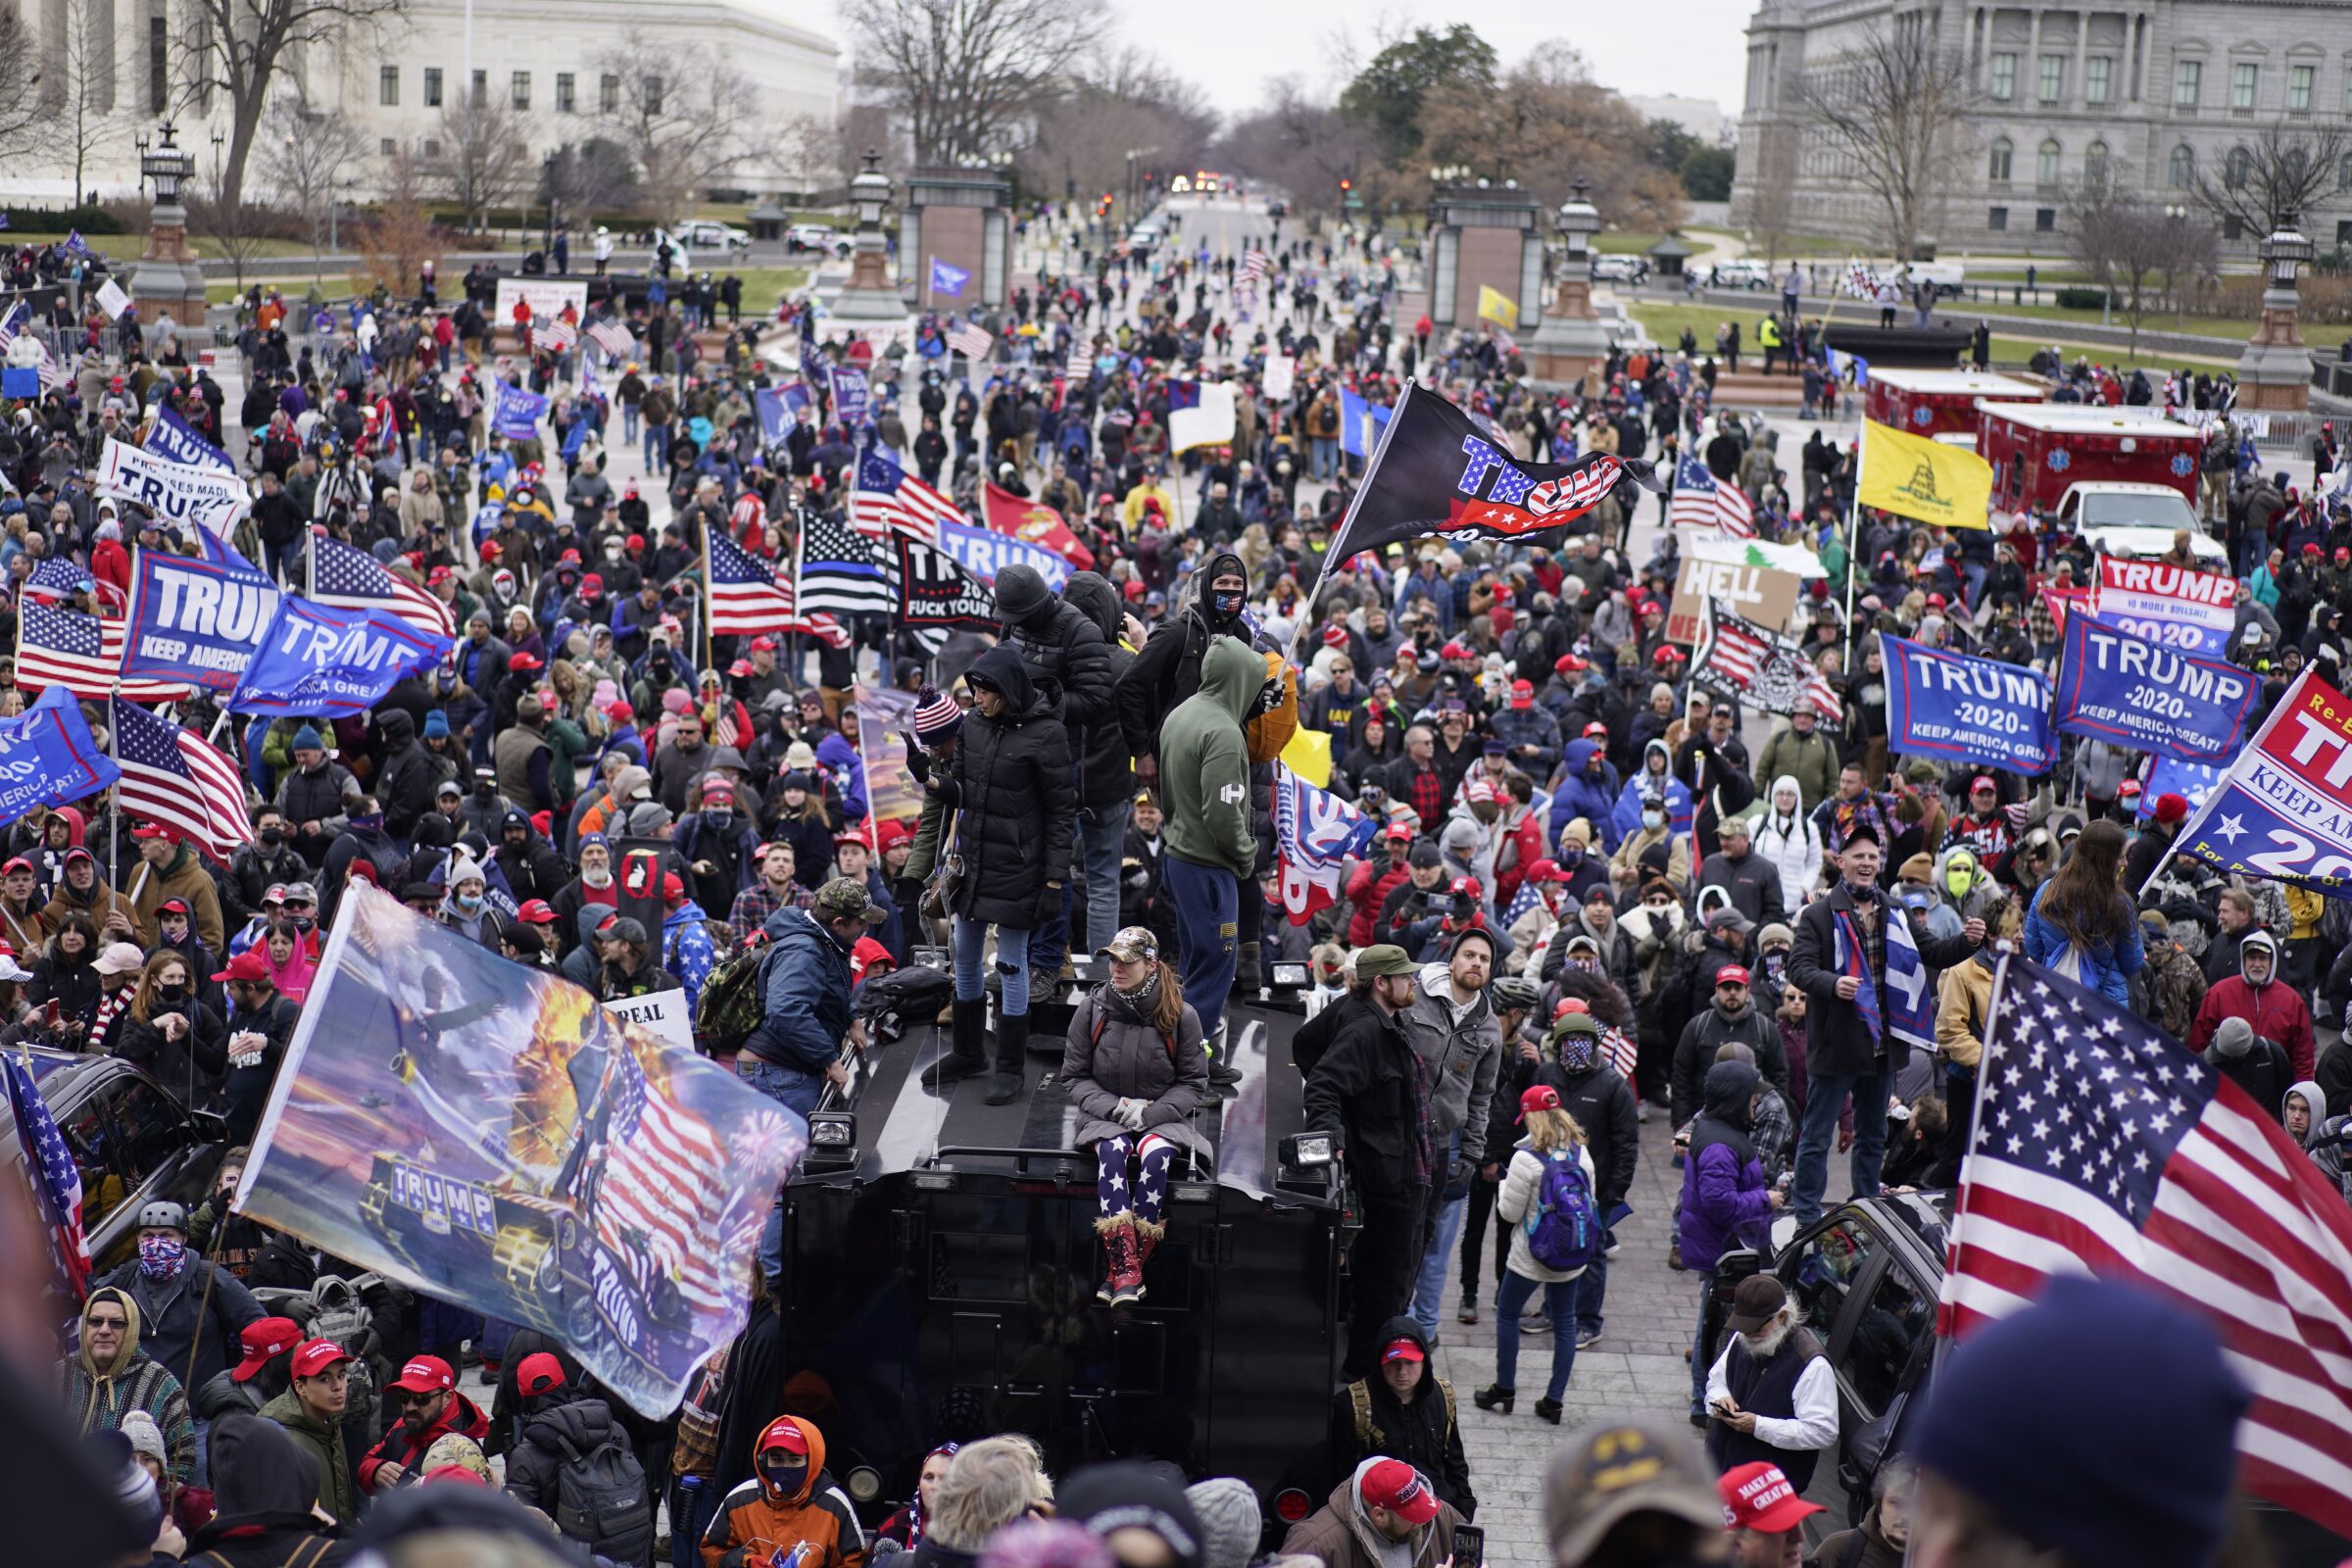 The facts you need to know about the Jan. 6 insurrection and its